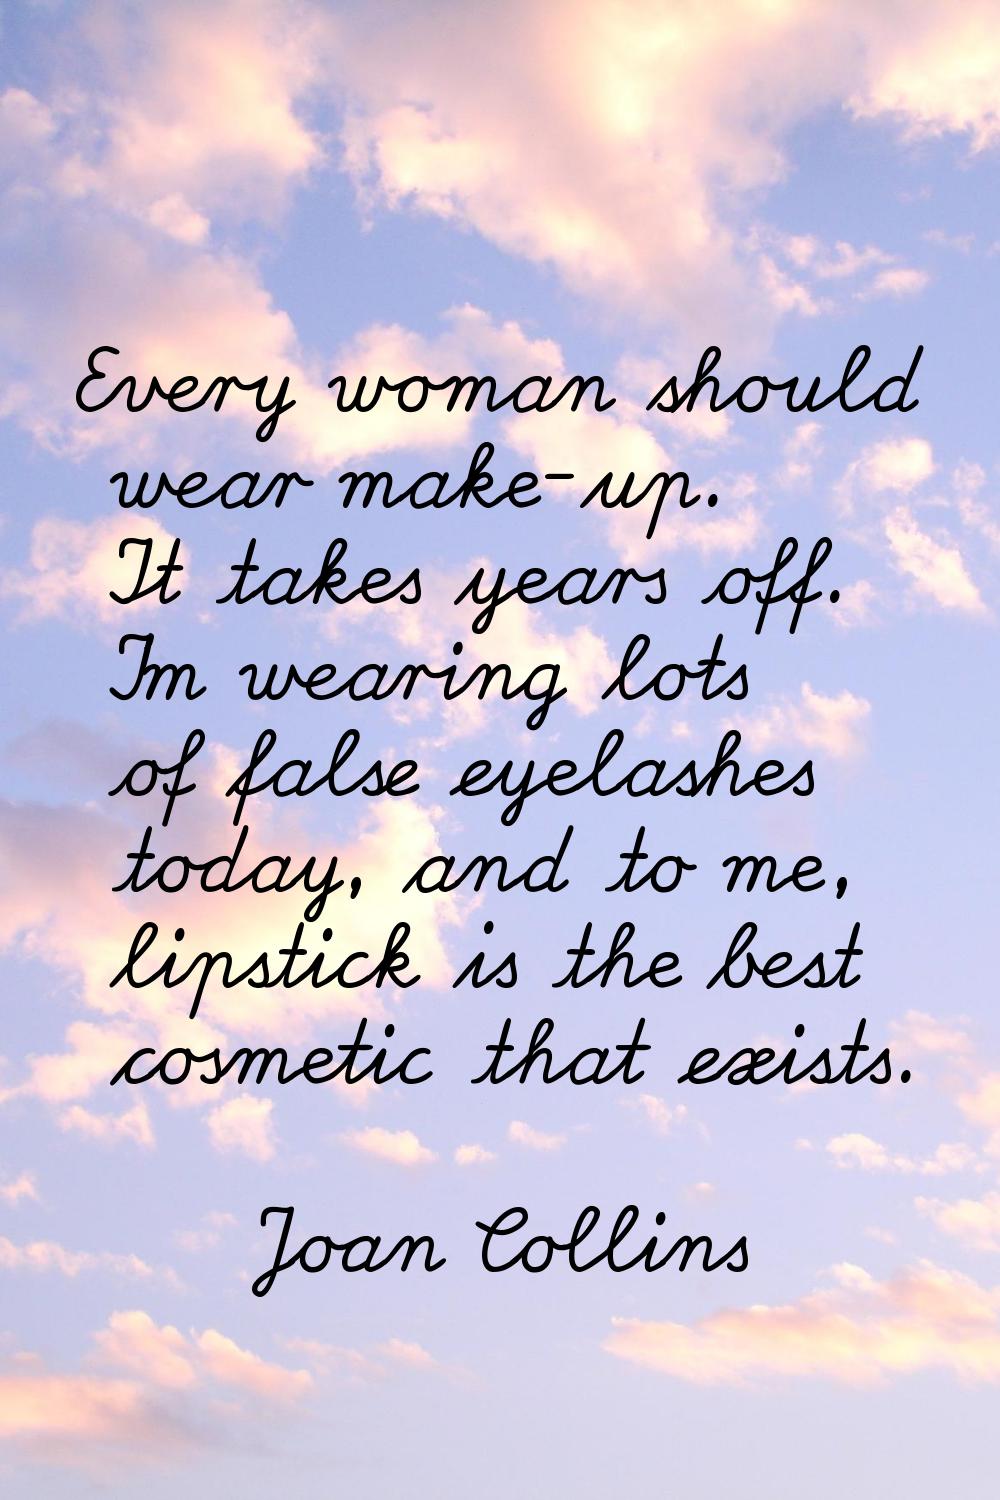 Every woman should wear make-up. It takes years off. I'm wearing lots of false eyelashes today, and